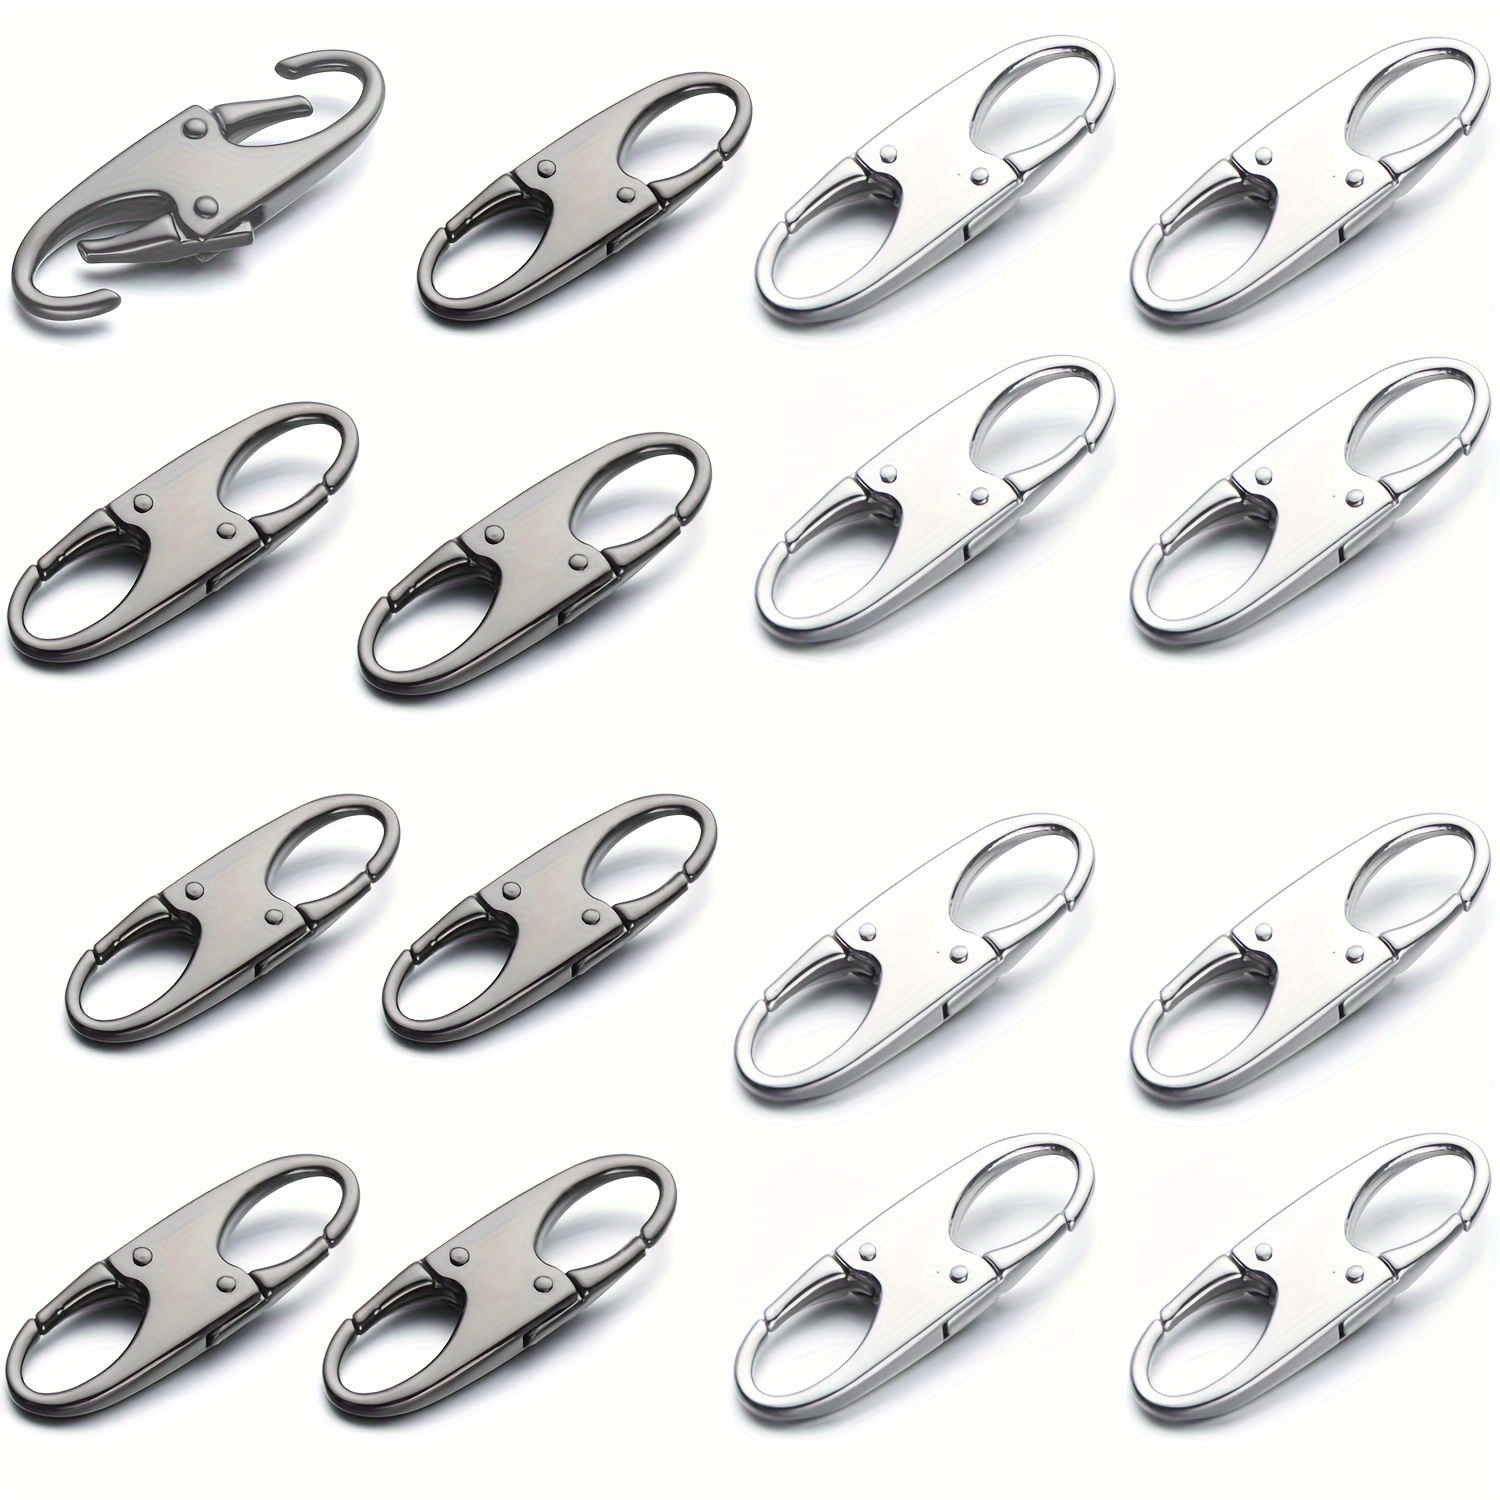 

16 Pieces-double Small Carabiner Clips - Zipper Clip Theft Deterrent - Holding The Zipper Closed - Zipper Pull Replacement